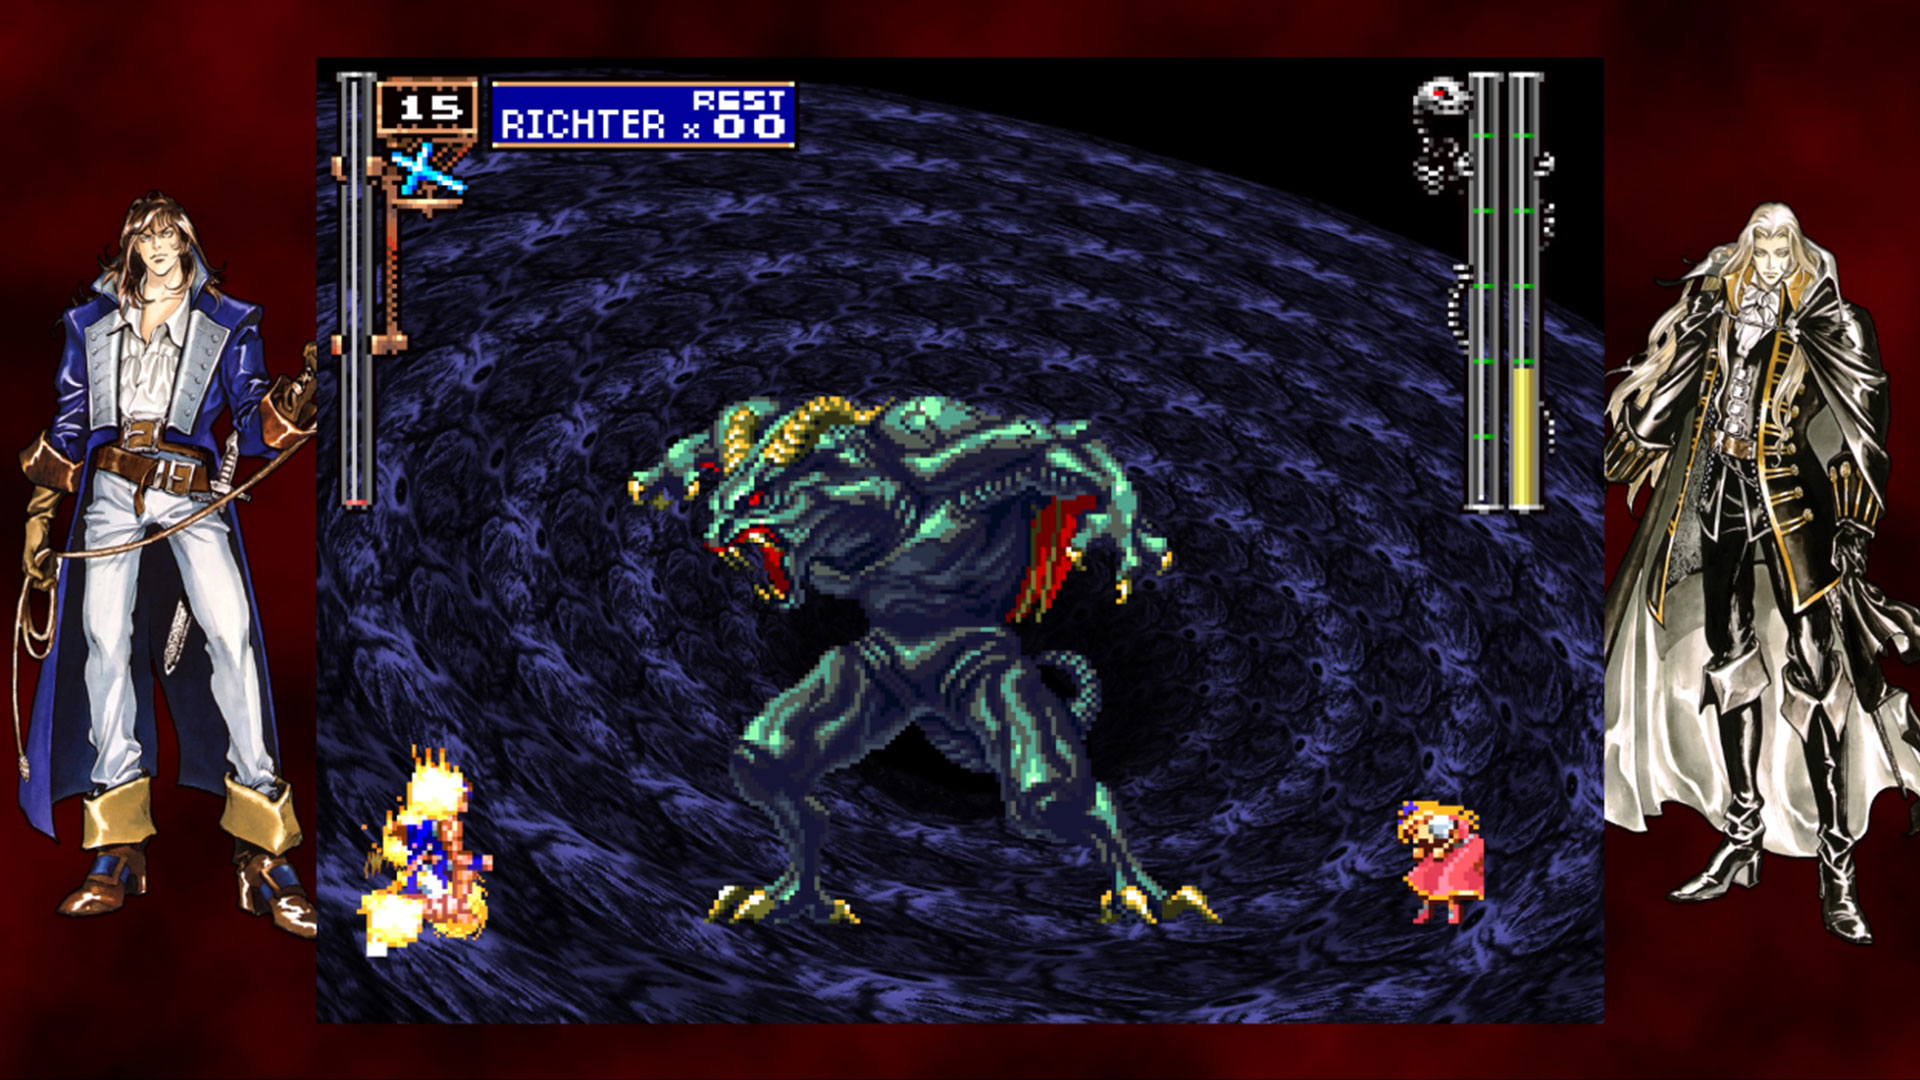 Castlevania: Symphony of the Night, one of our best retro games